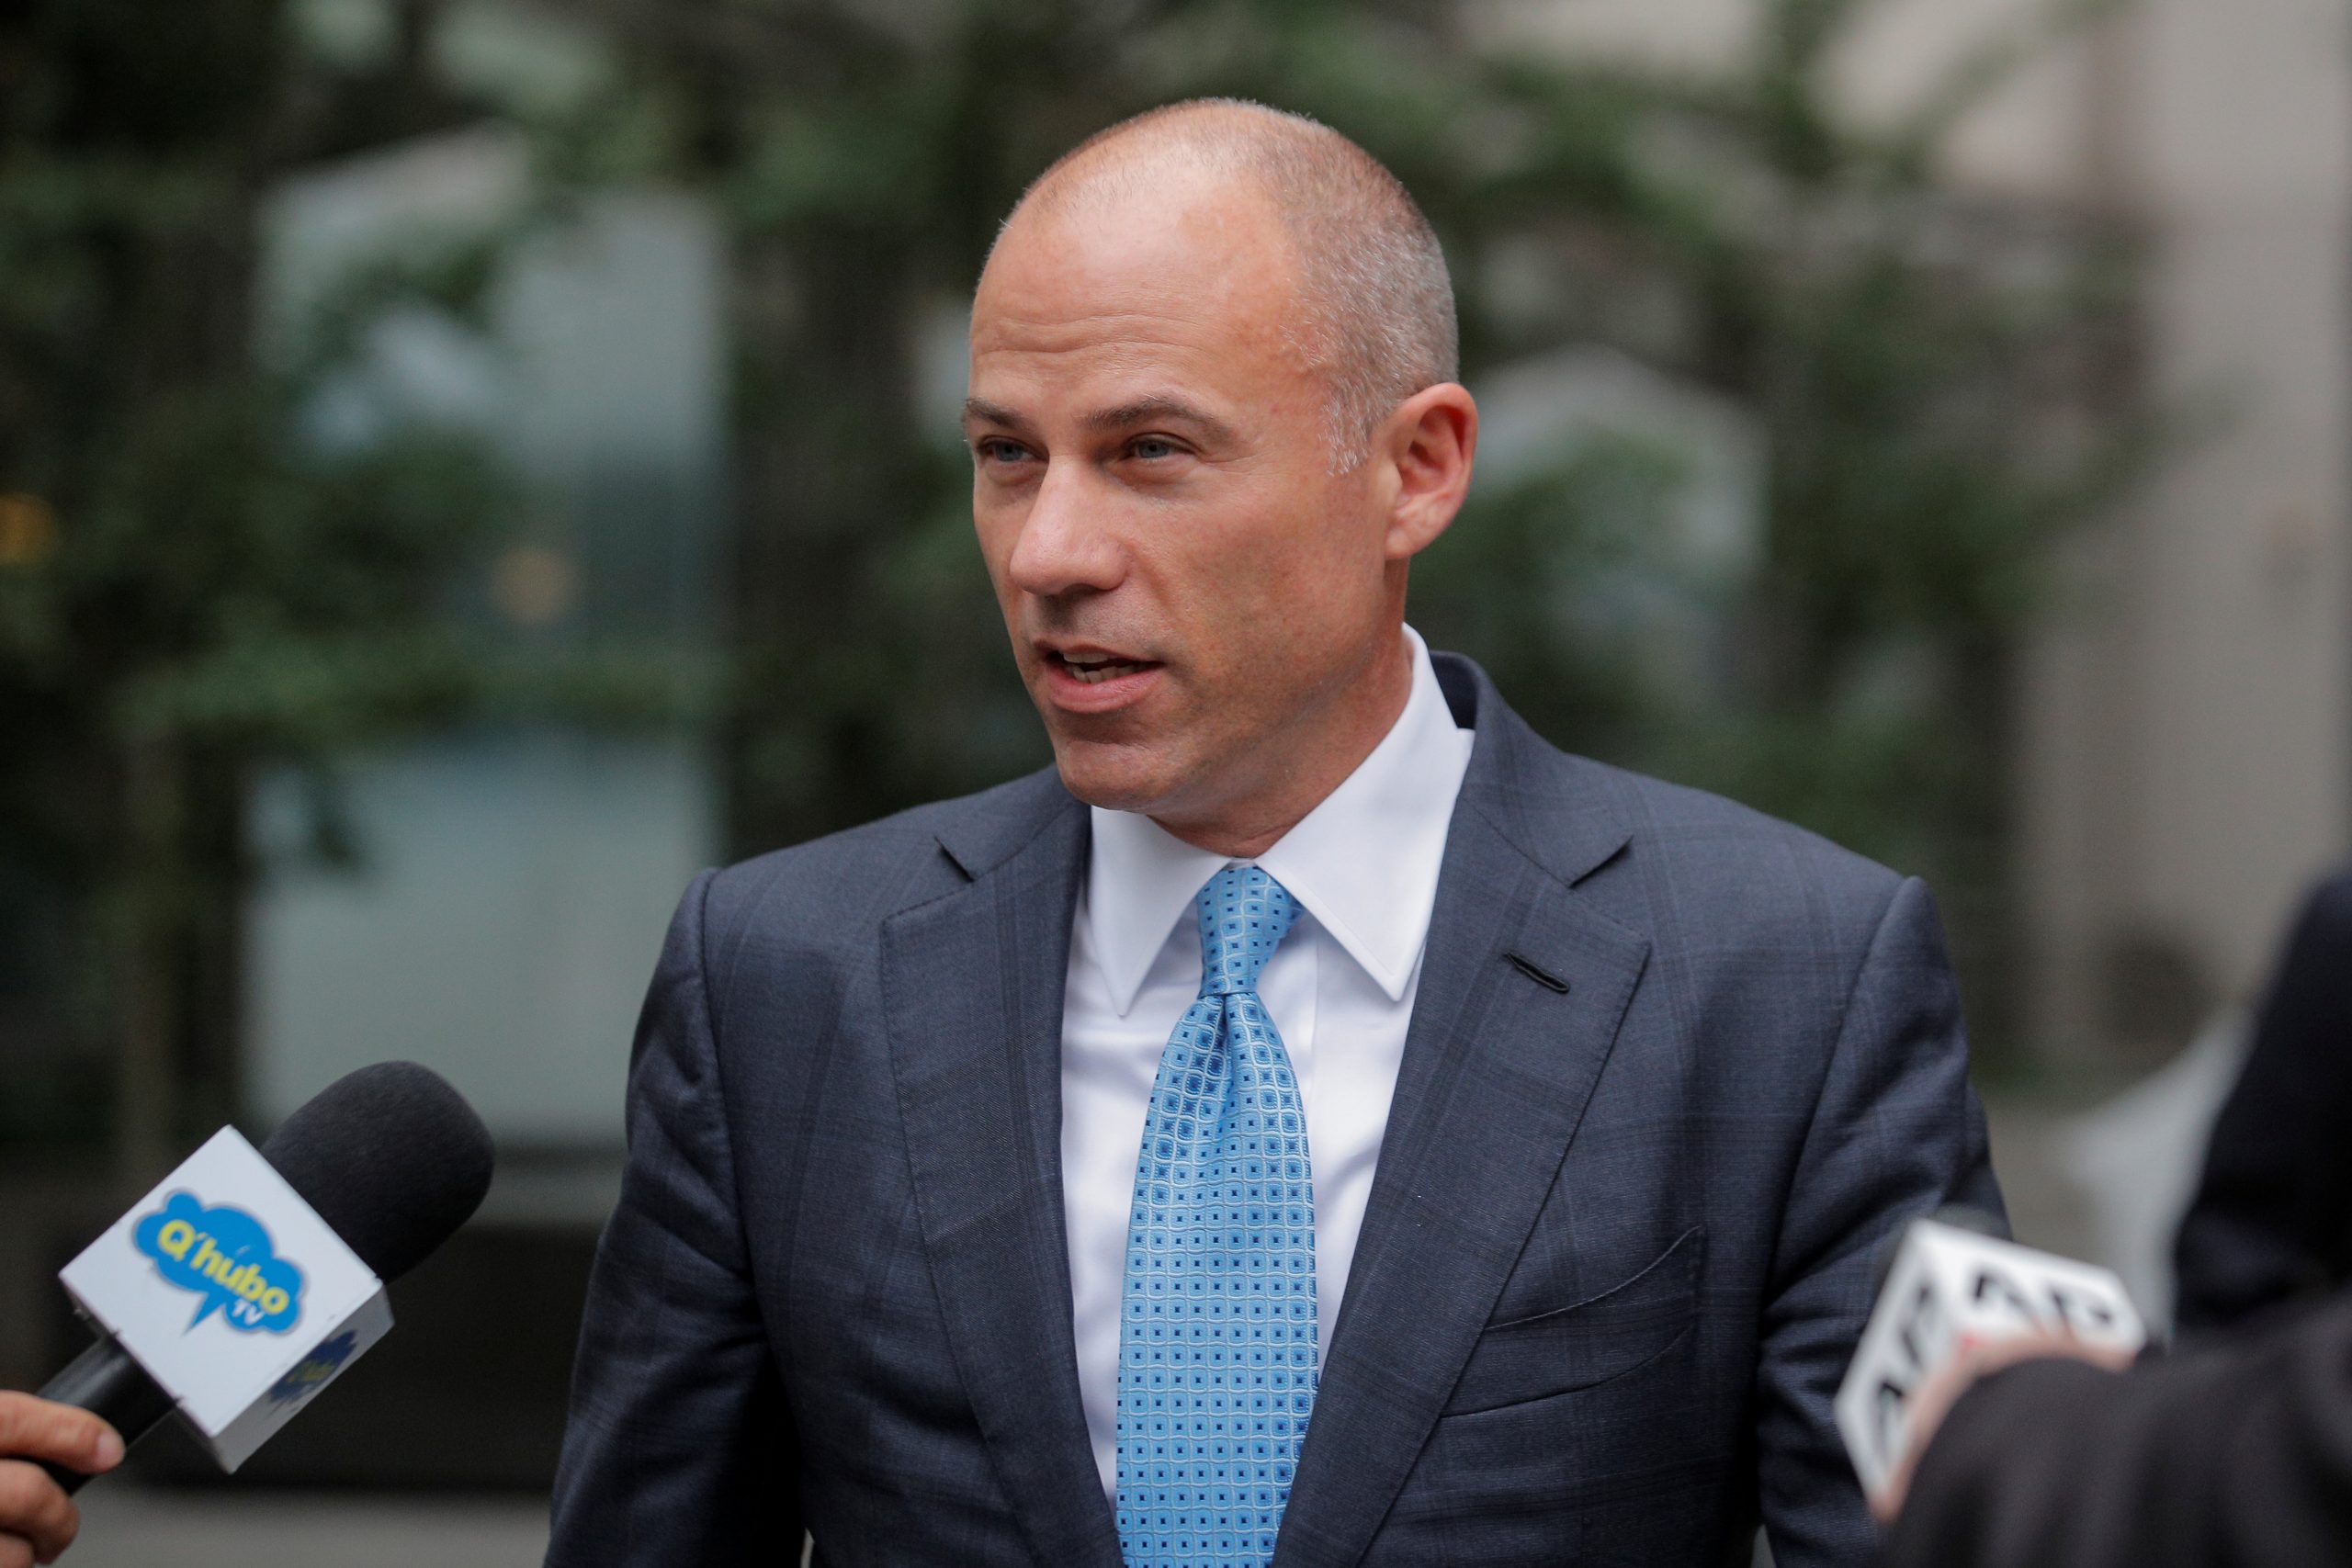 Avenatti Says He’s in Contact with Trump Legal Defense Team, Ready and Willing to Testify